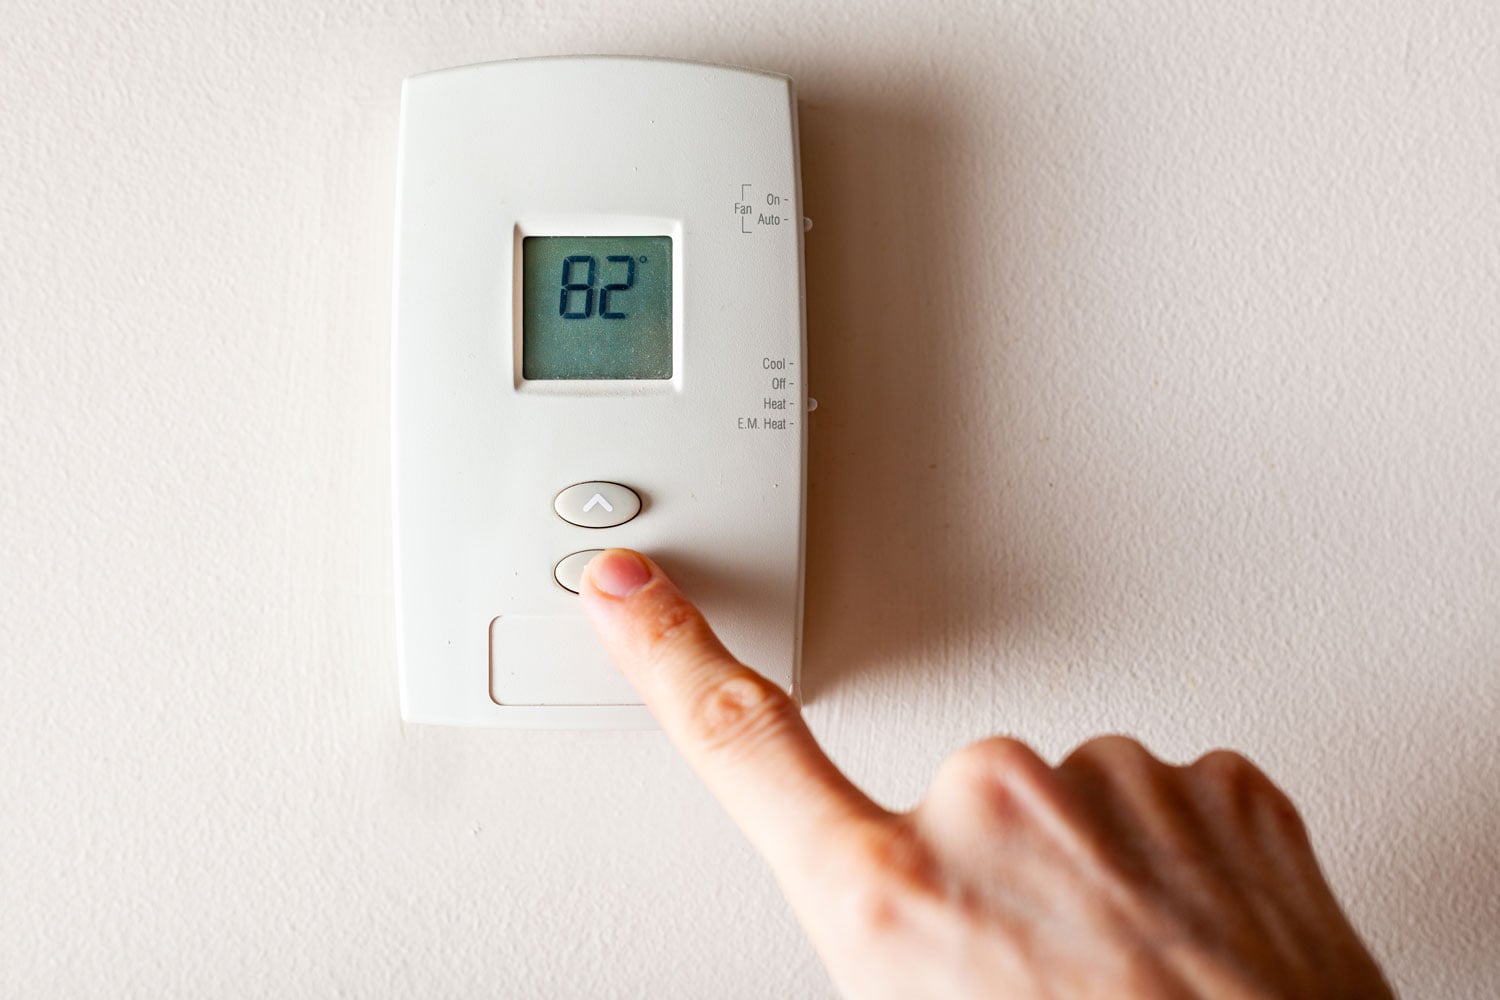 Adjusting the living room temperature using the thermostat